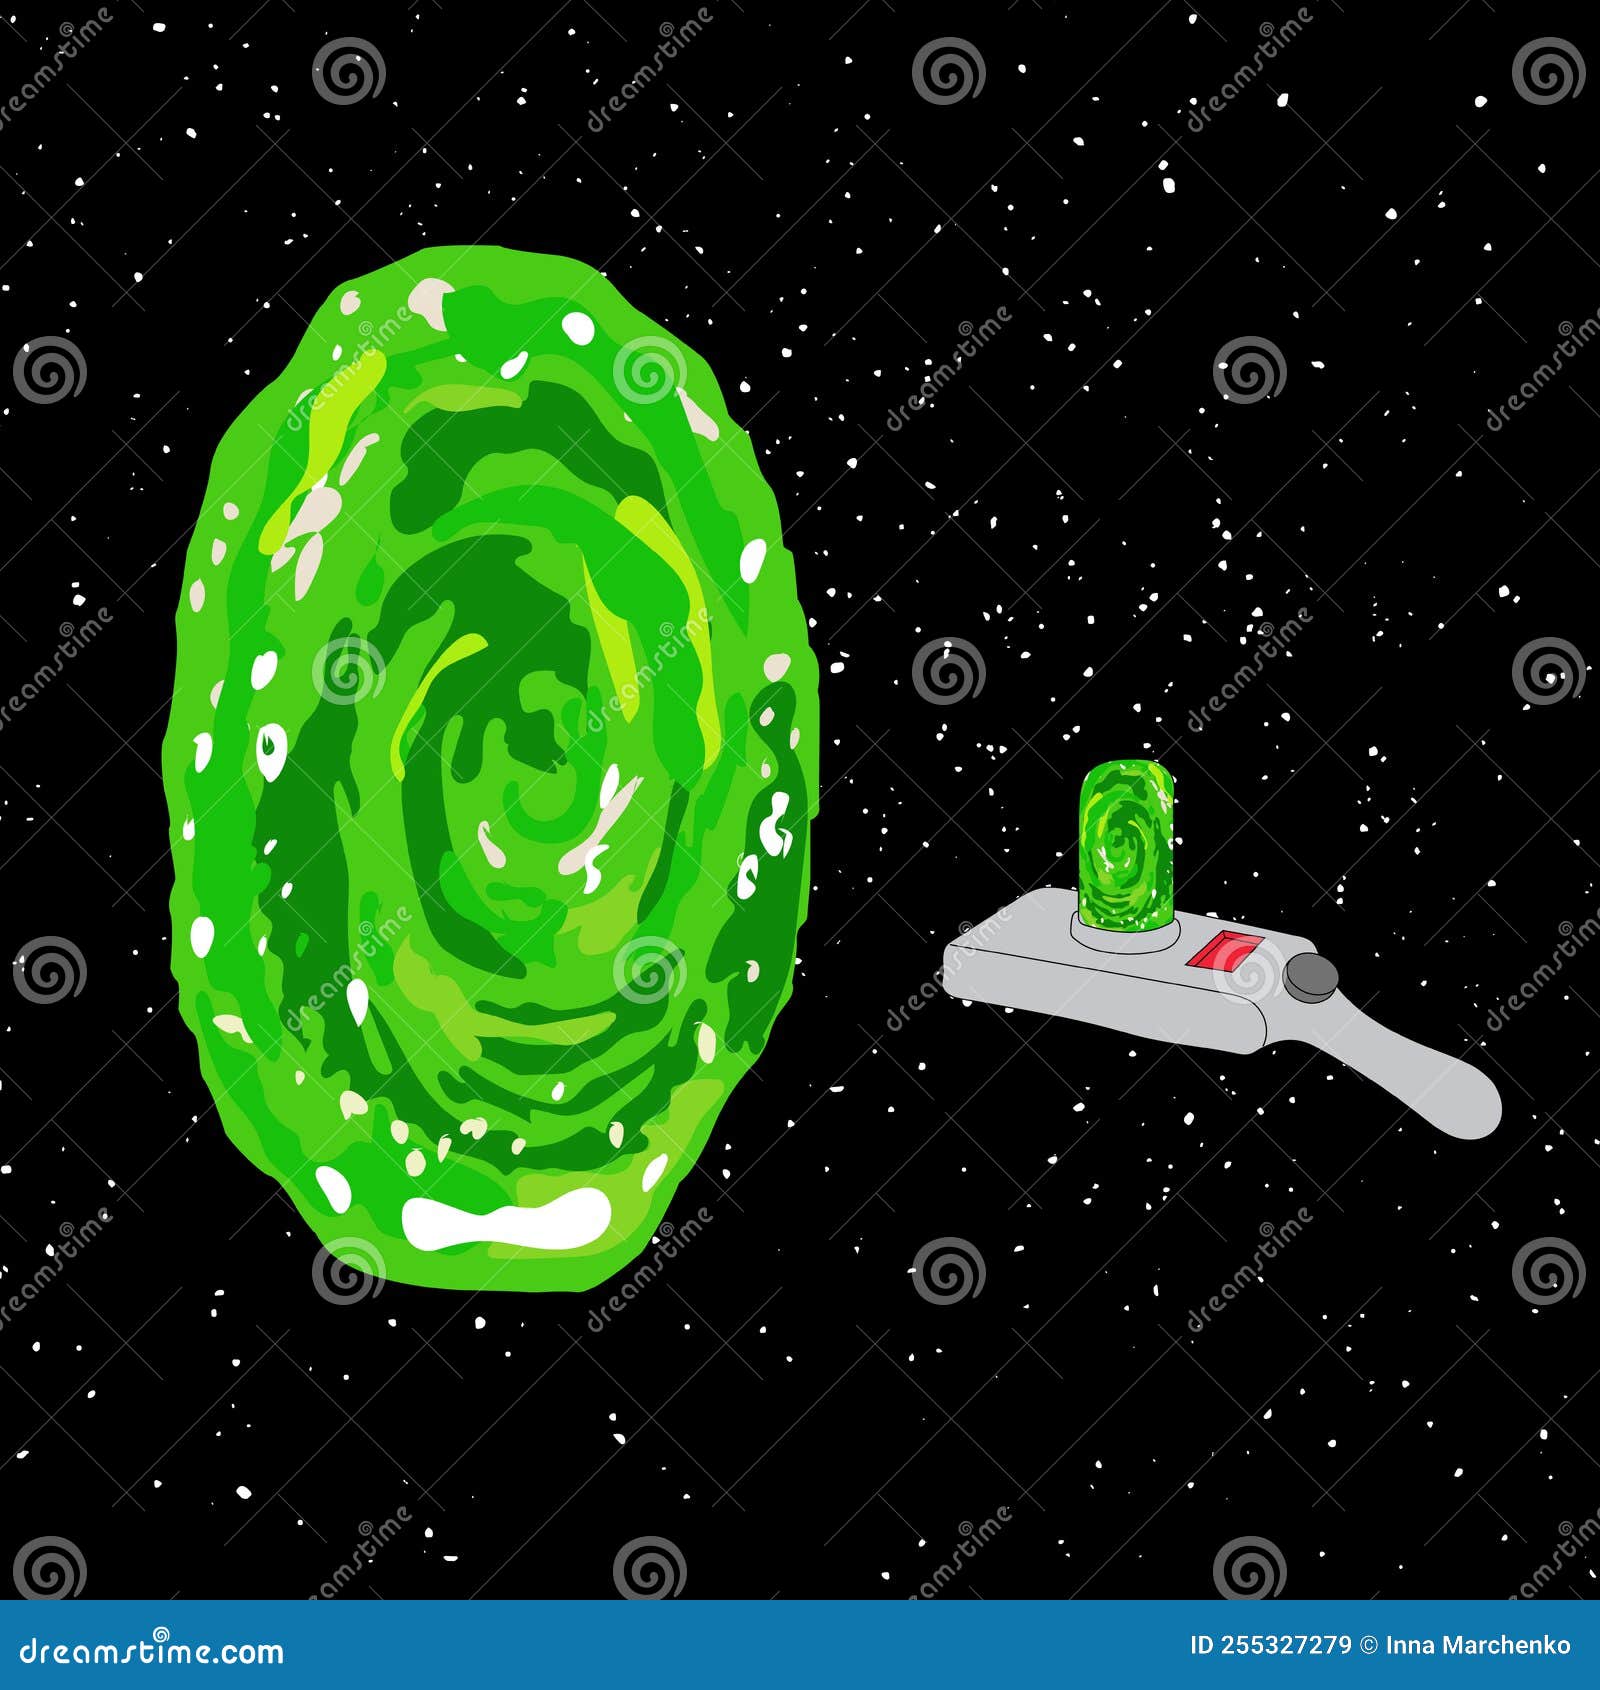 0+] Rick And Morty Portal Backgrounds